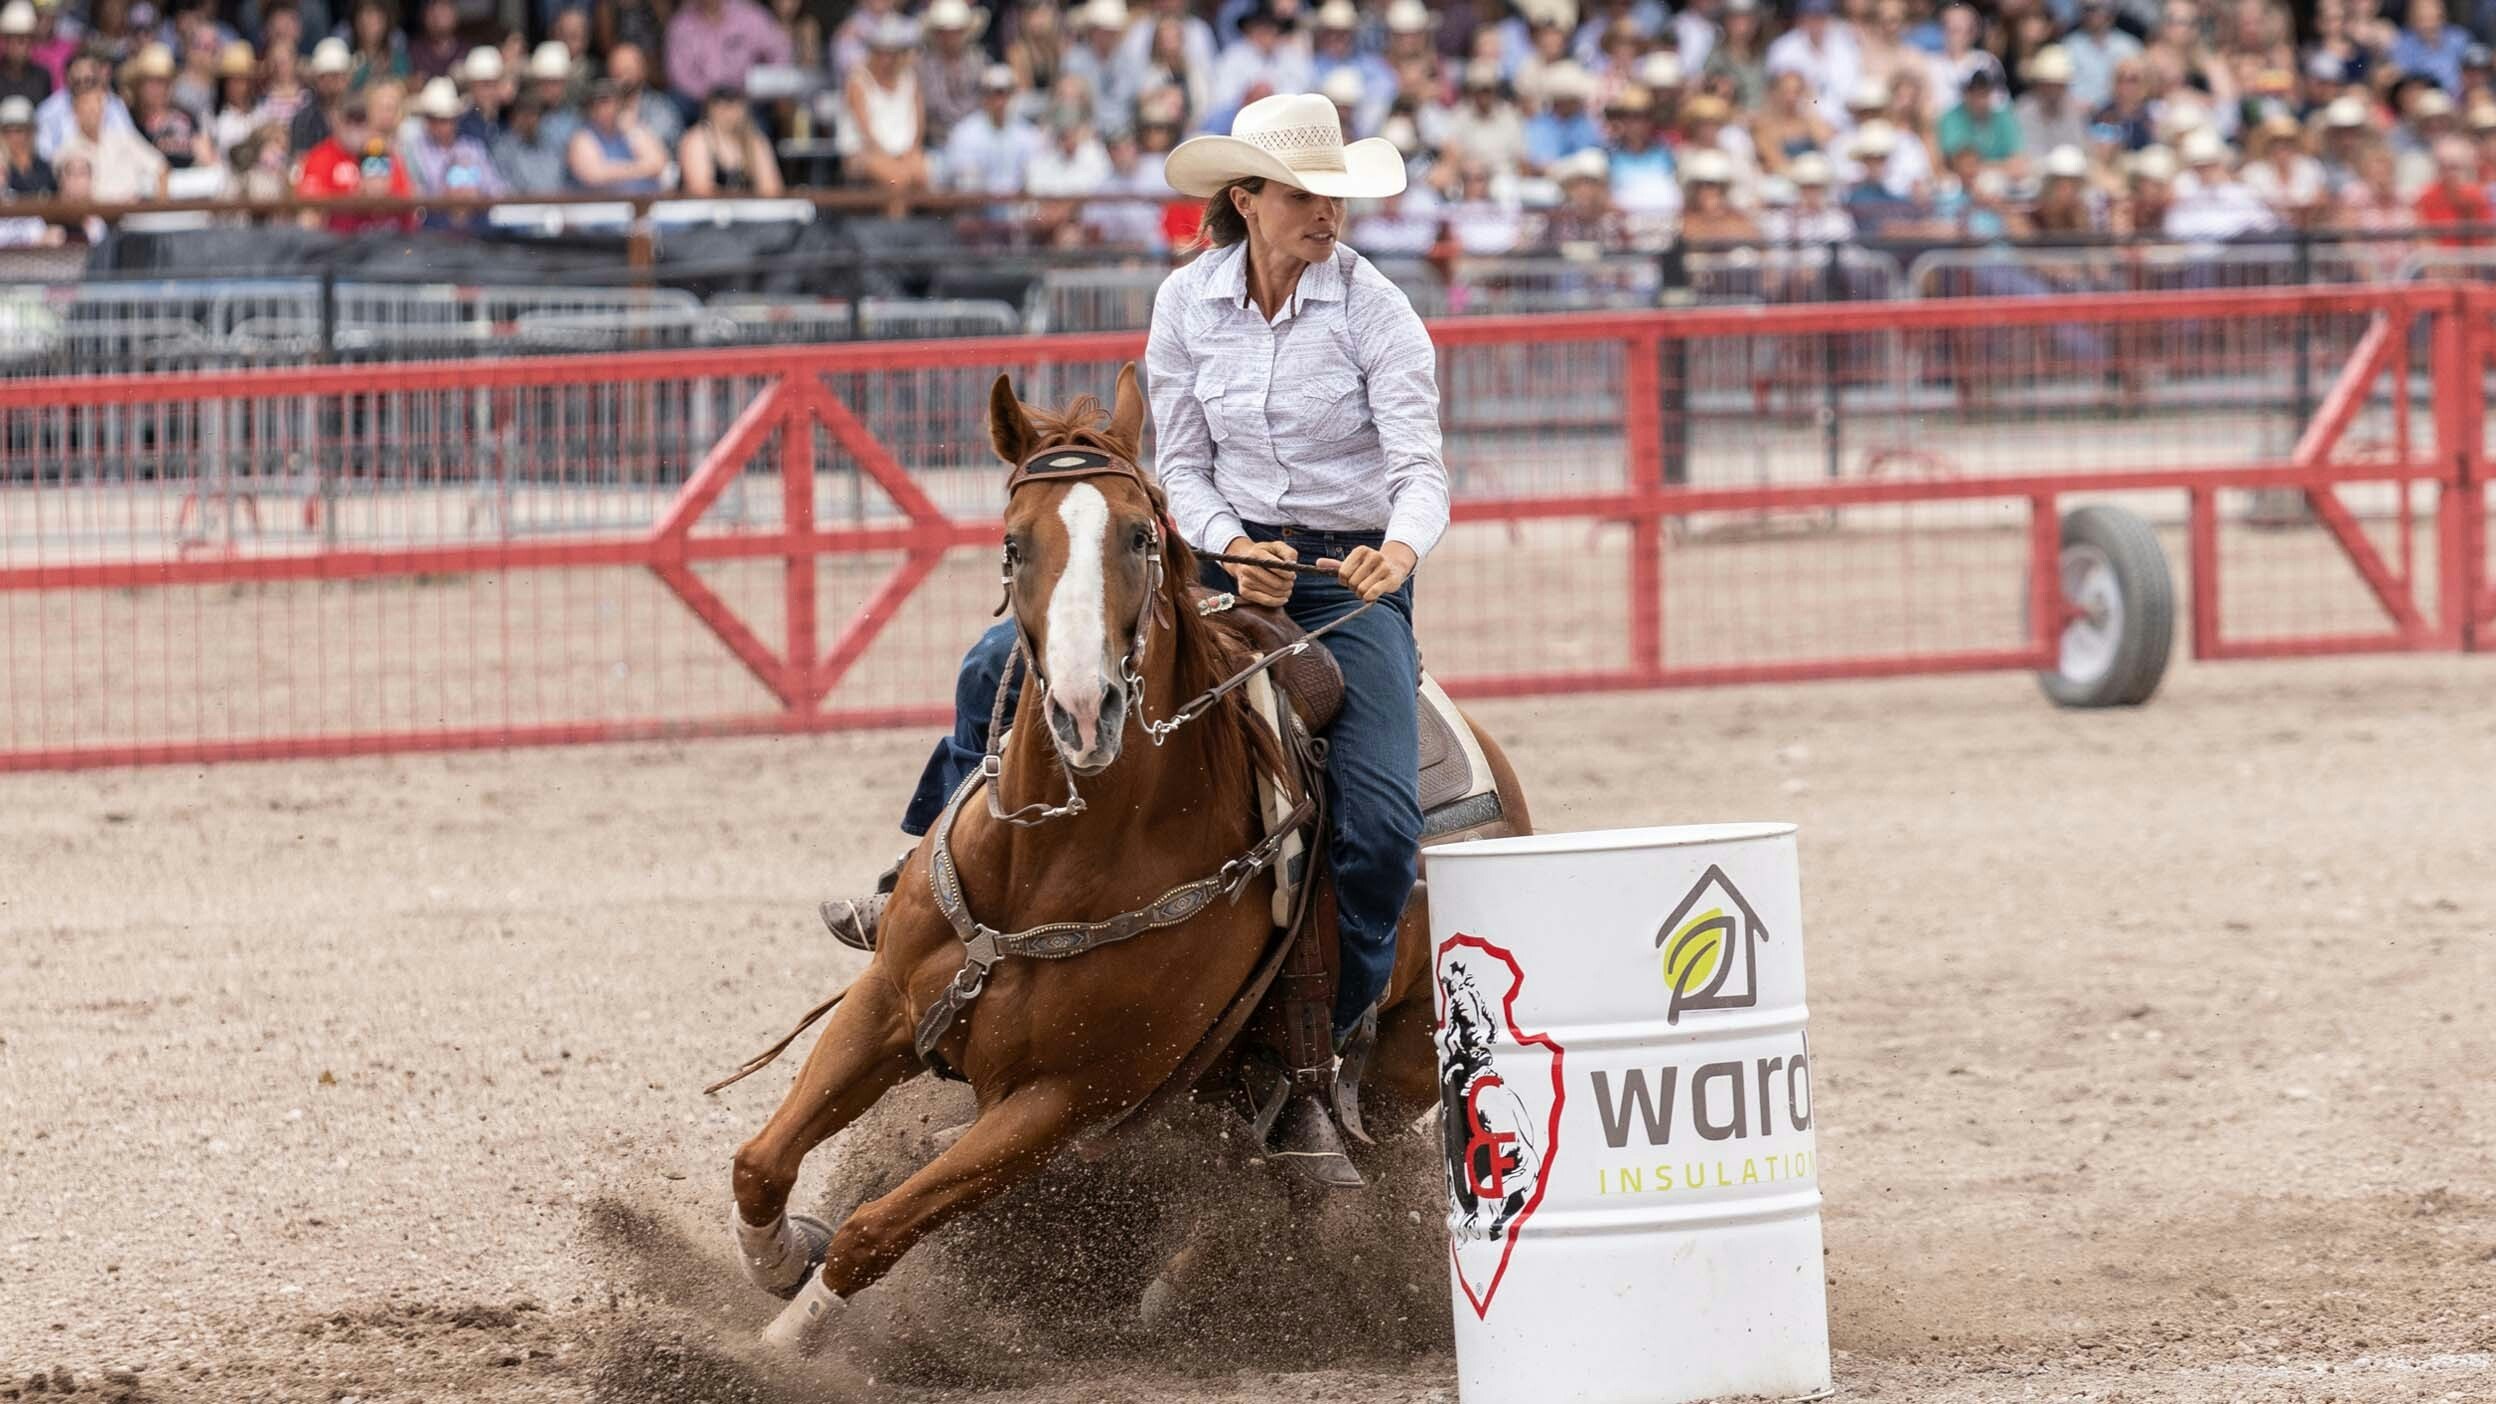 Shyann Lucas from Jackson, WY competes in the Barrel Racing at Cheyenne Frontier Days on July 29, 2023.